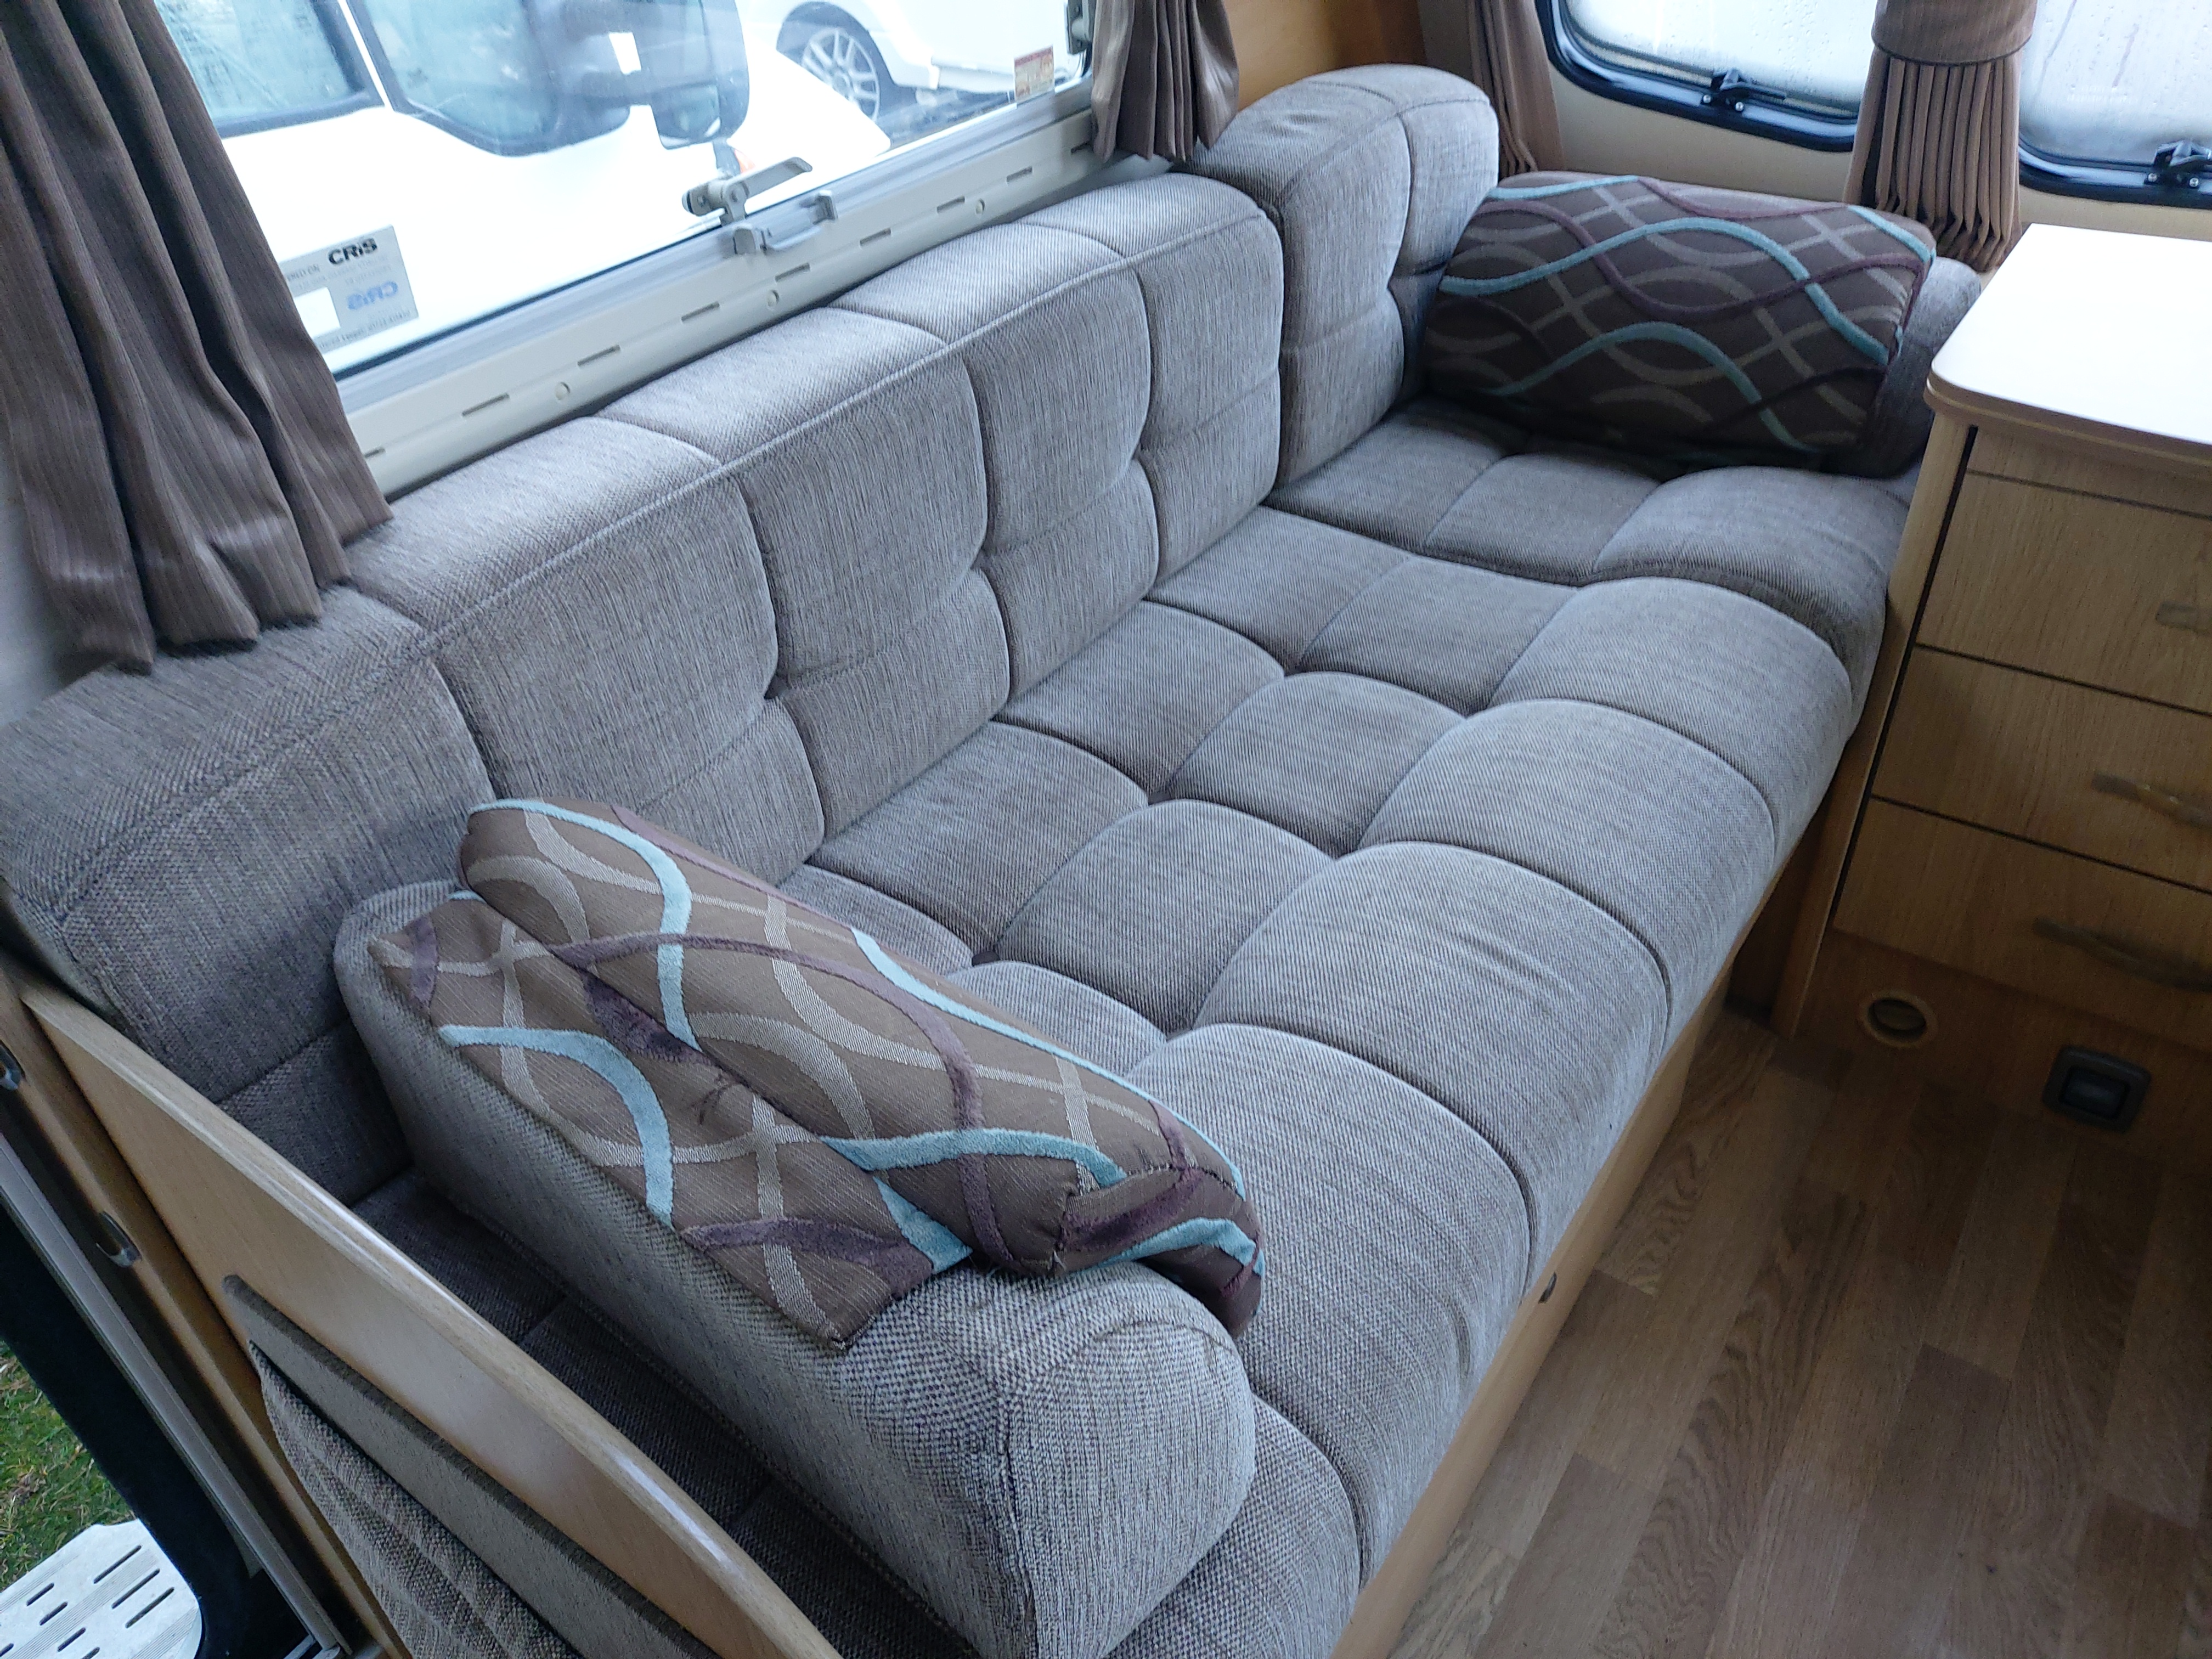 2011 Coachman Pastiche 560 4 Berth Fixed Bed End Washroom Caravan with Motor Mover